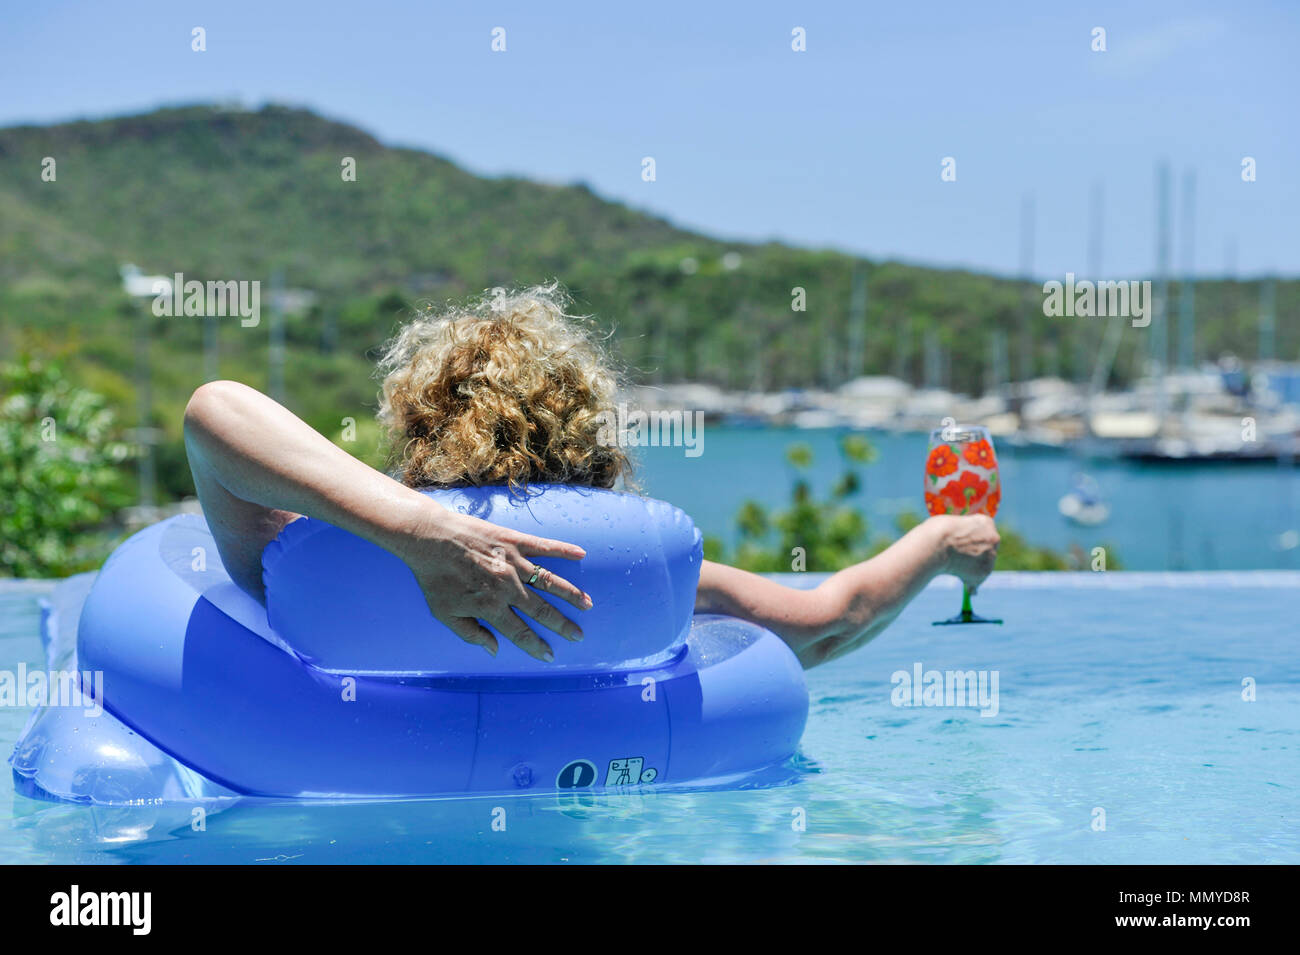 Antigua Lesser Antilles islands in the Caribbean West Indies - Woman on inflatable in an infinity swimming pool view overlooking English Harbour Stock Photo